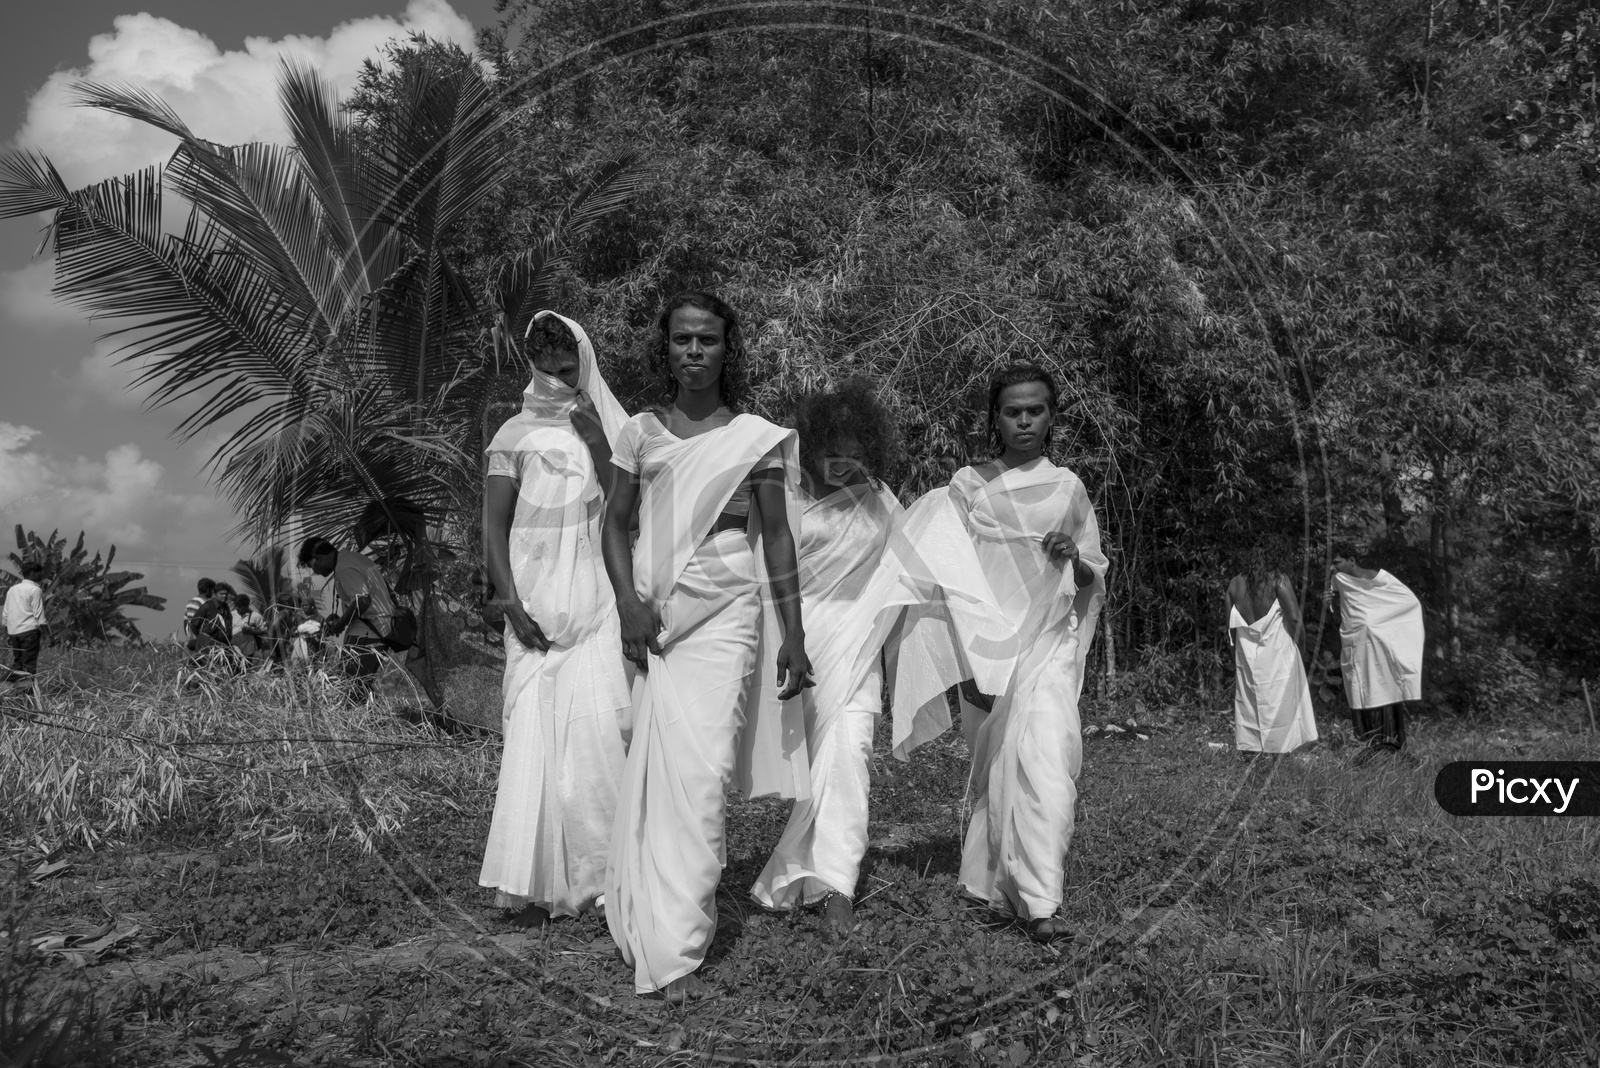 Transgenders In White Sarees As a tradition In Koovagam Festival